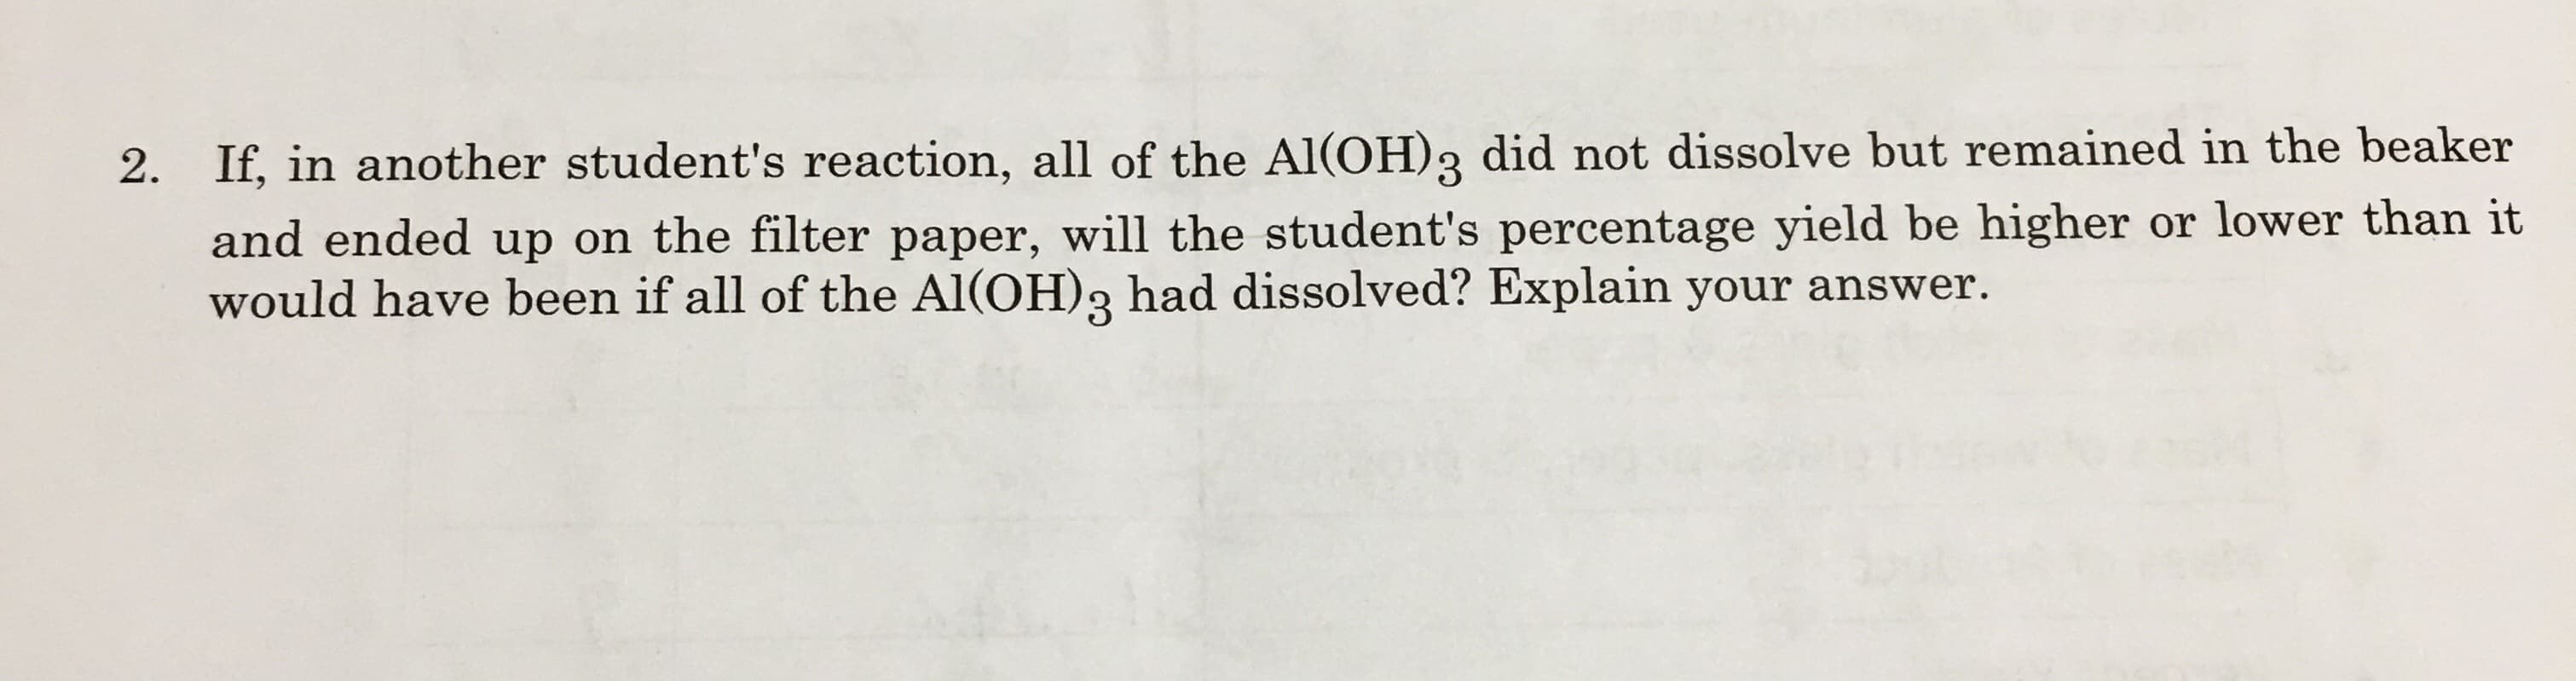 2. If, in another student's reaction, all of the Al(OH)3 did not dissolve but remained in the beaker
and ended up on the filter paper, will the student's percentage yield be higher or lower than it
would have been if all of the Al(OH)3
had dissolved? Explain your answer.
